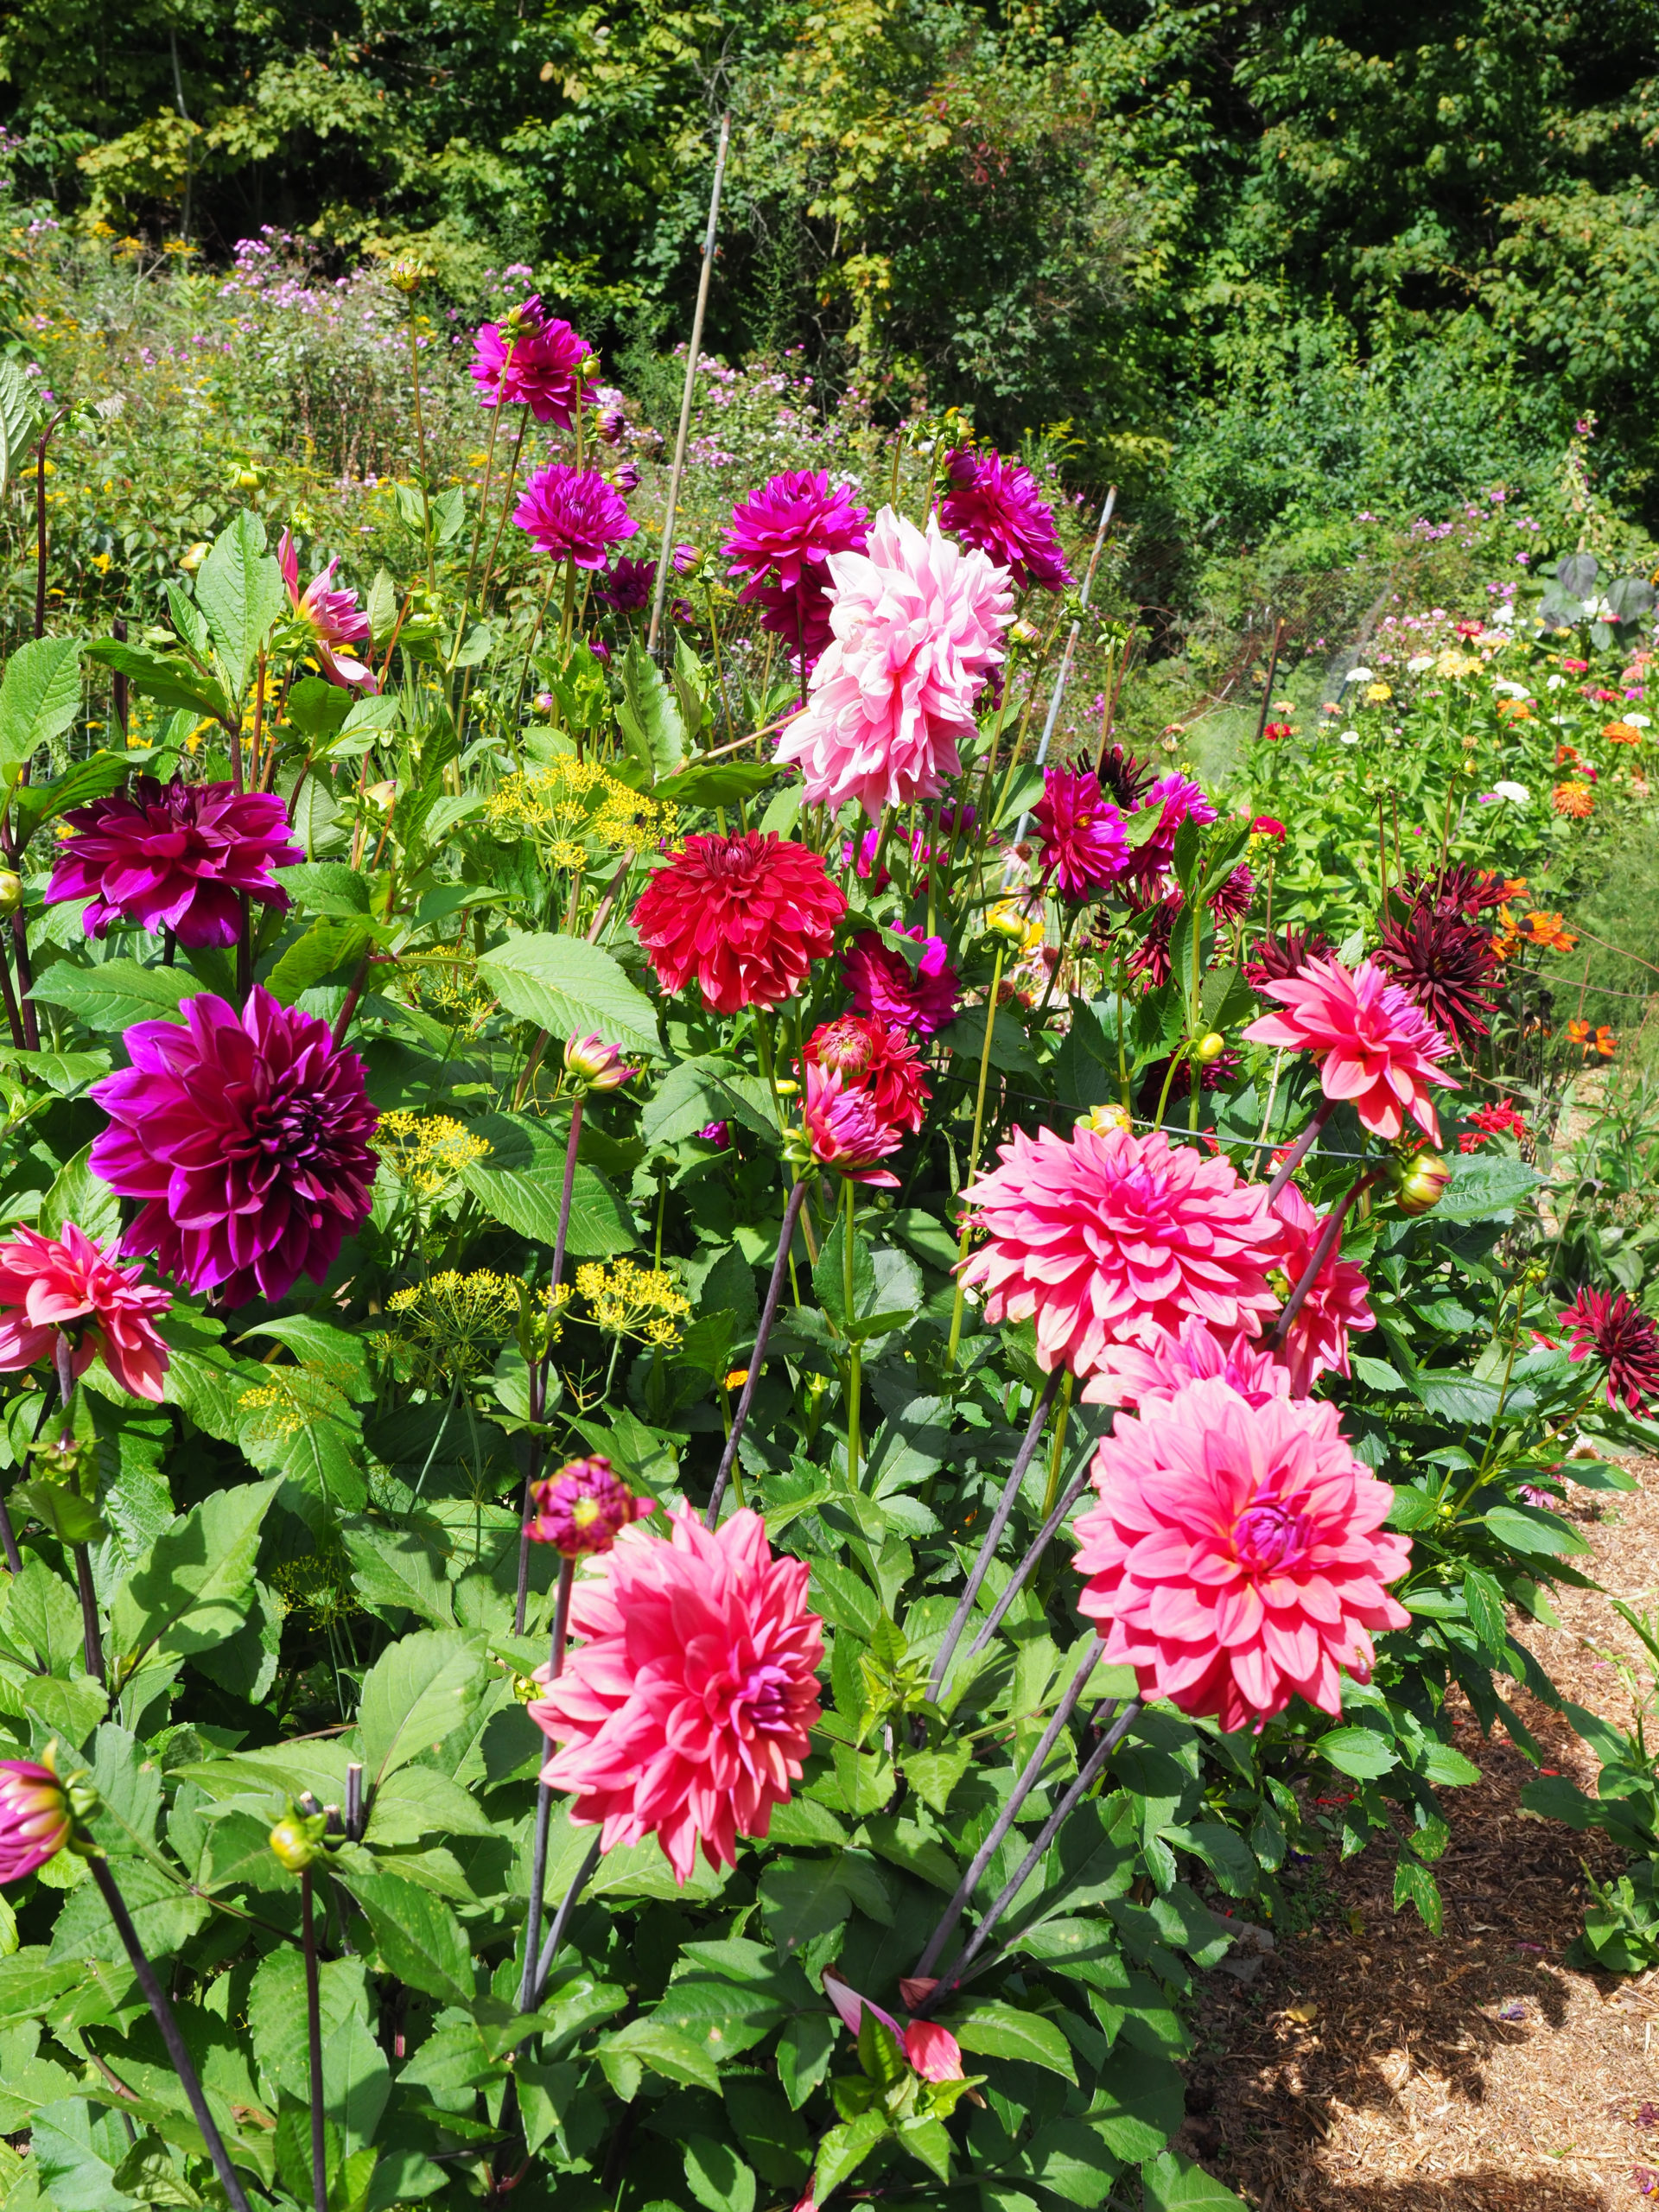 Dahlias (tuberous types) come in a range of colors as both singles and doubles (pictured here).  The hollow stems should be “flamed” after cutting and tubers planted through the late spring will result in flowers well into November.